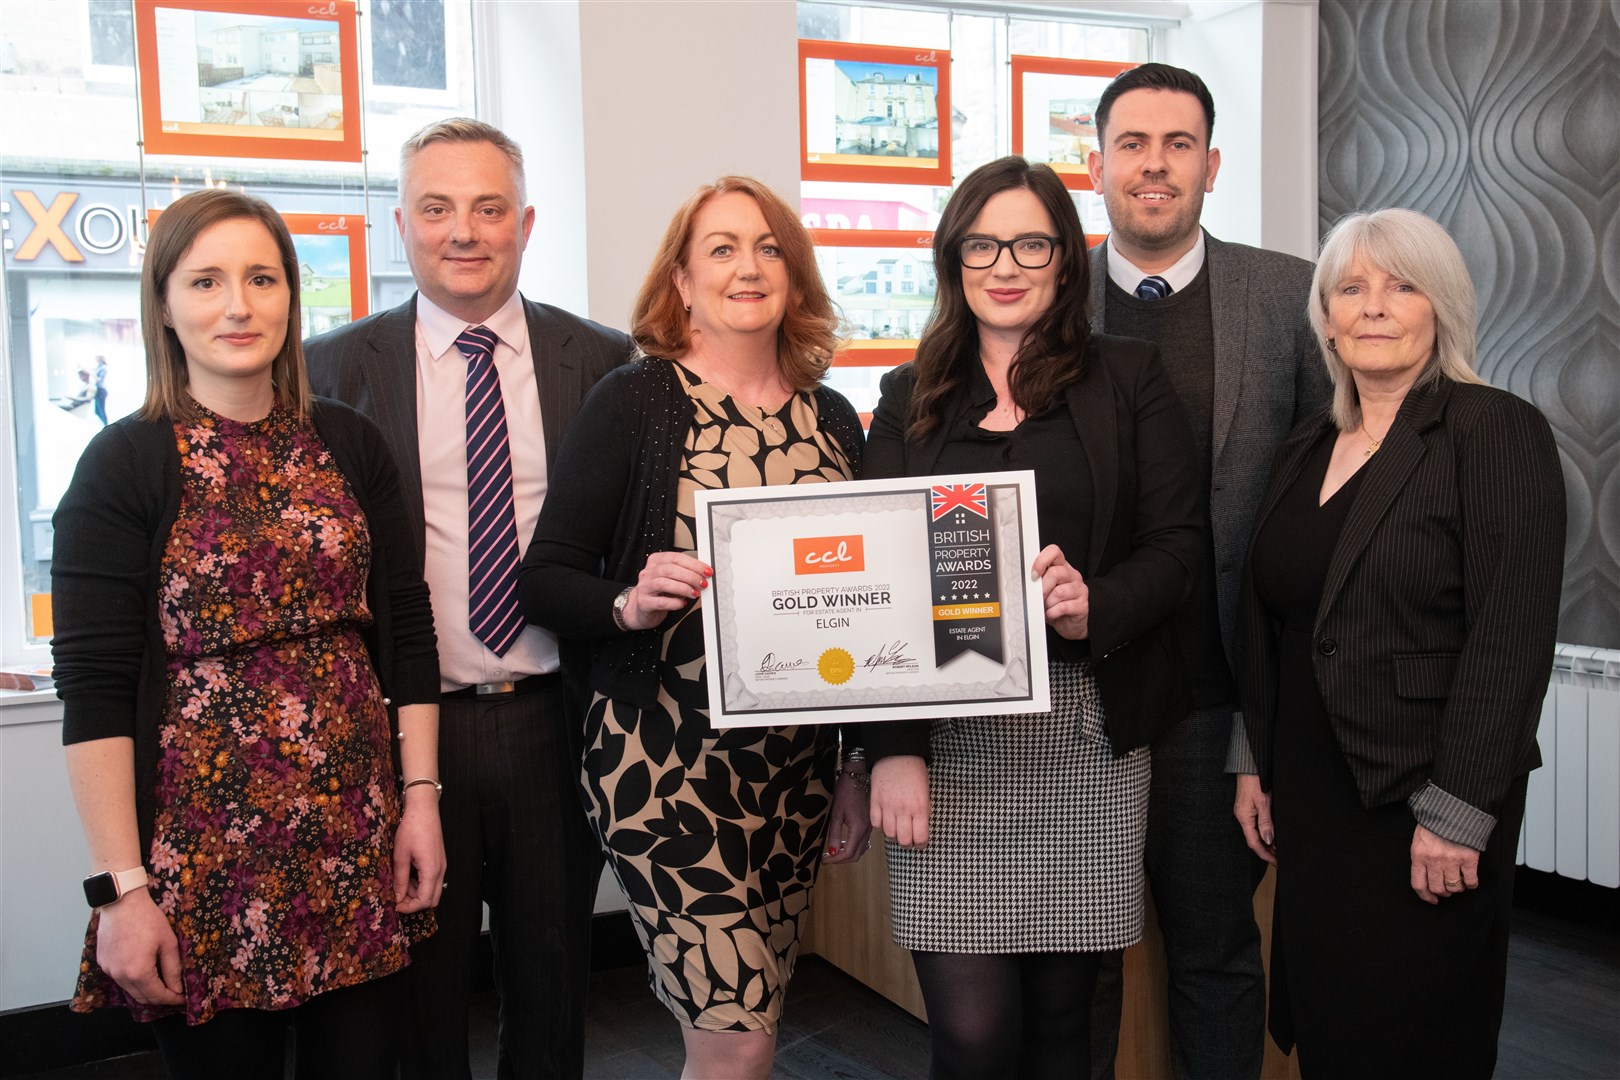 Teamwork, the CCL family, from left, Kerry Kirk (Sales Negotiator), David Pickering (Director), Coralie Pickering (Director), Claire Millar (Business Development Manager), Sam Grant (Commercial Manager) and Audrey Pope (Residential Manager). Picture: Daniel Forsyth